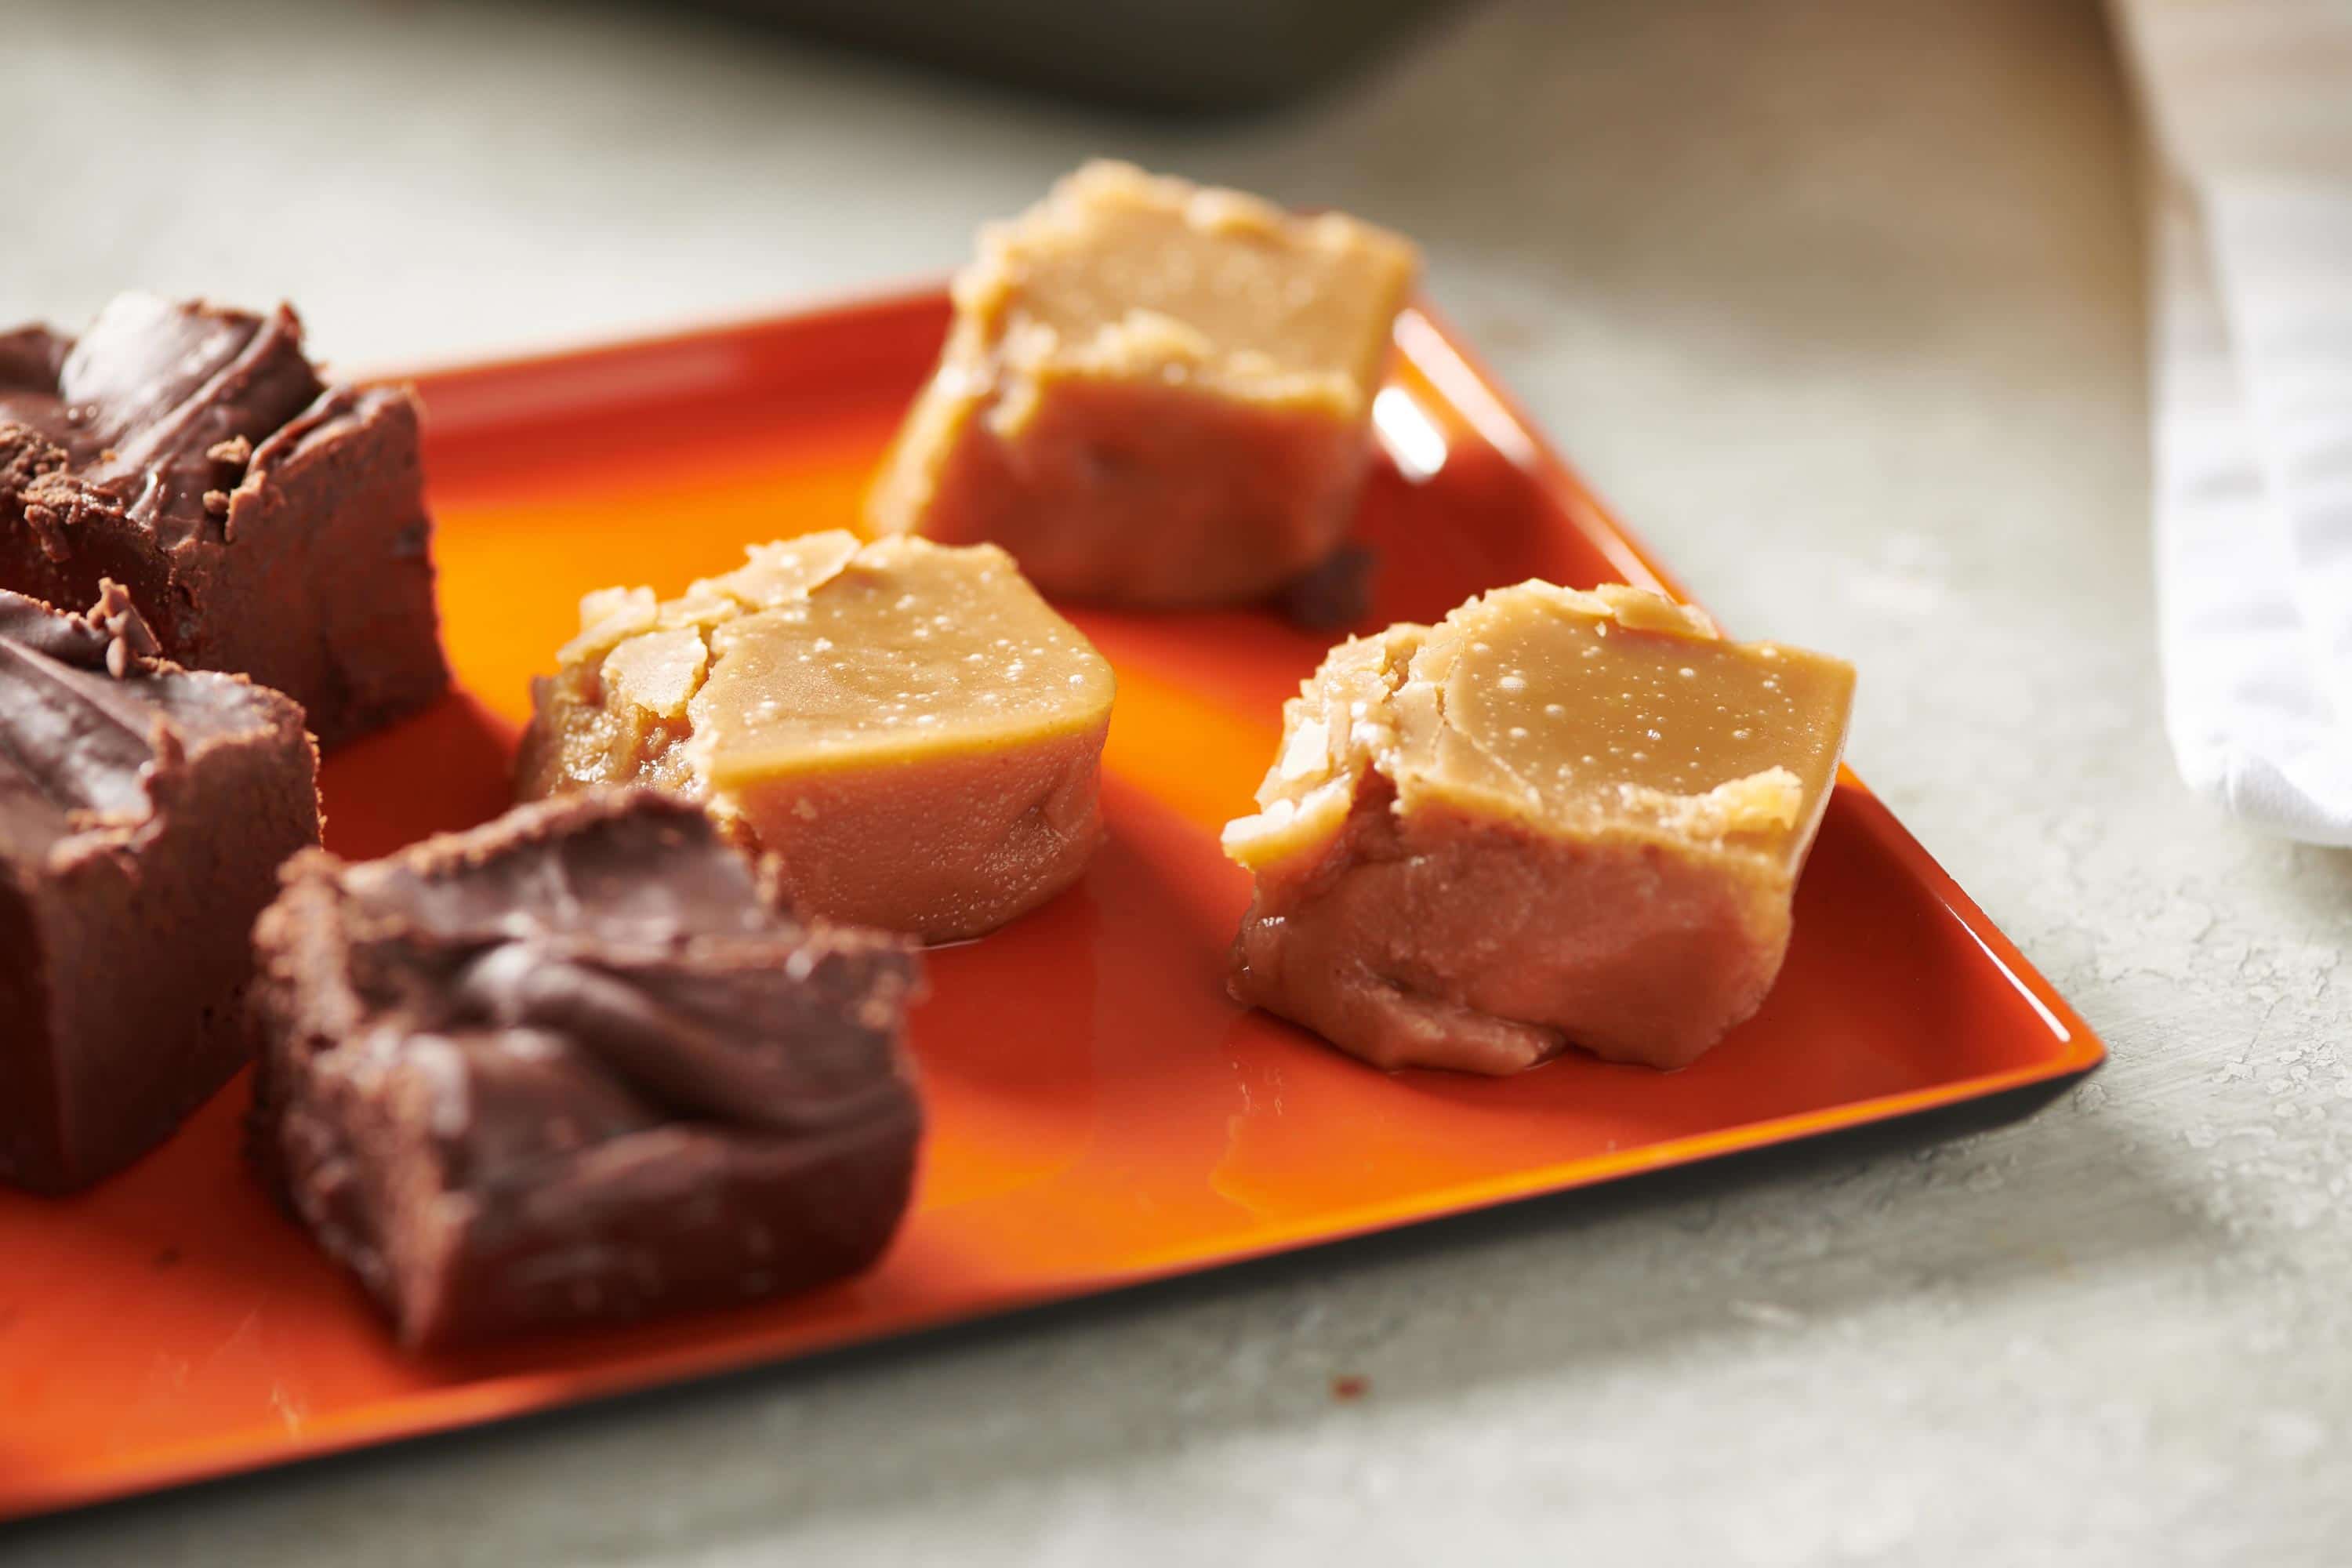 Squares of Brown Sugar Fudge and other fudge on an orange plate.